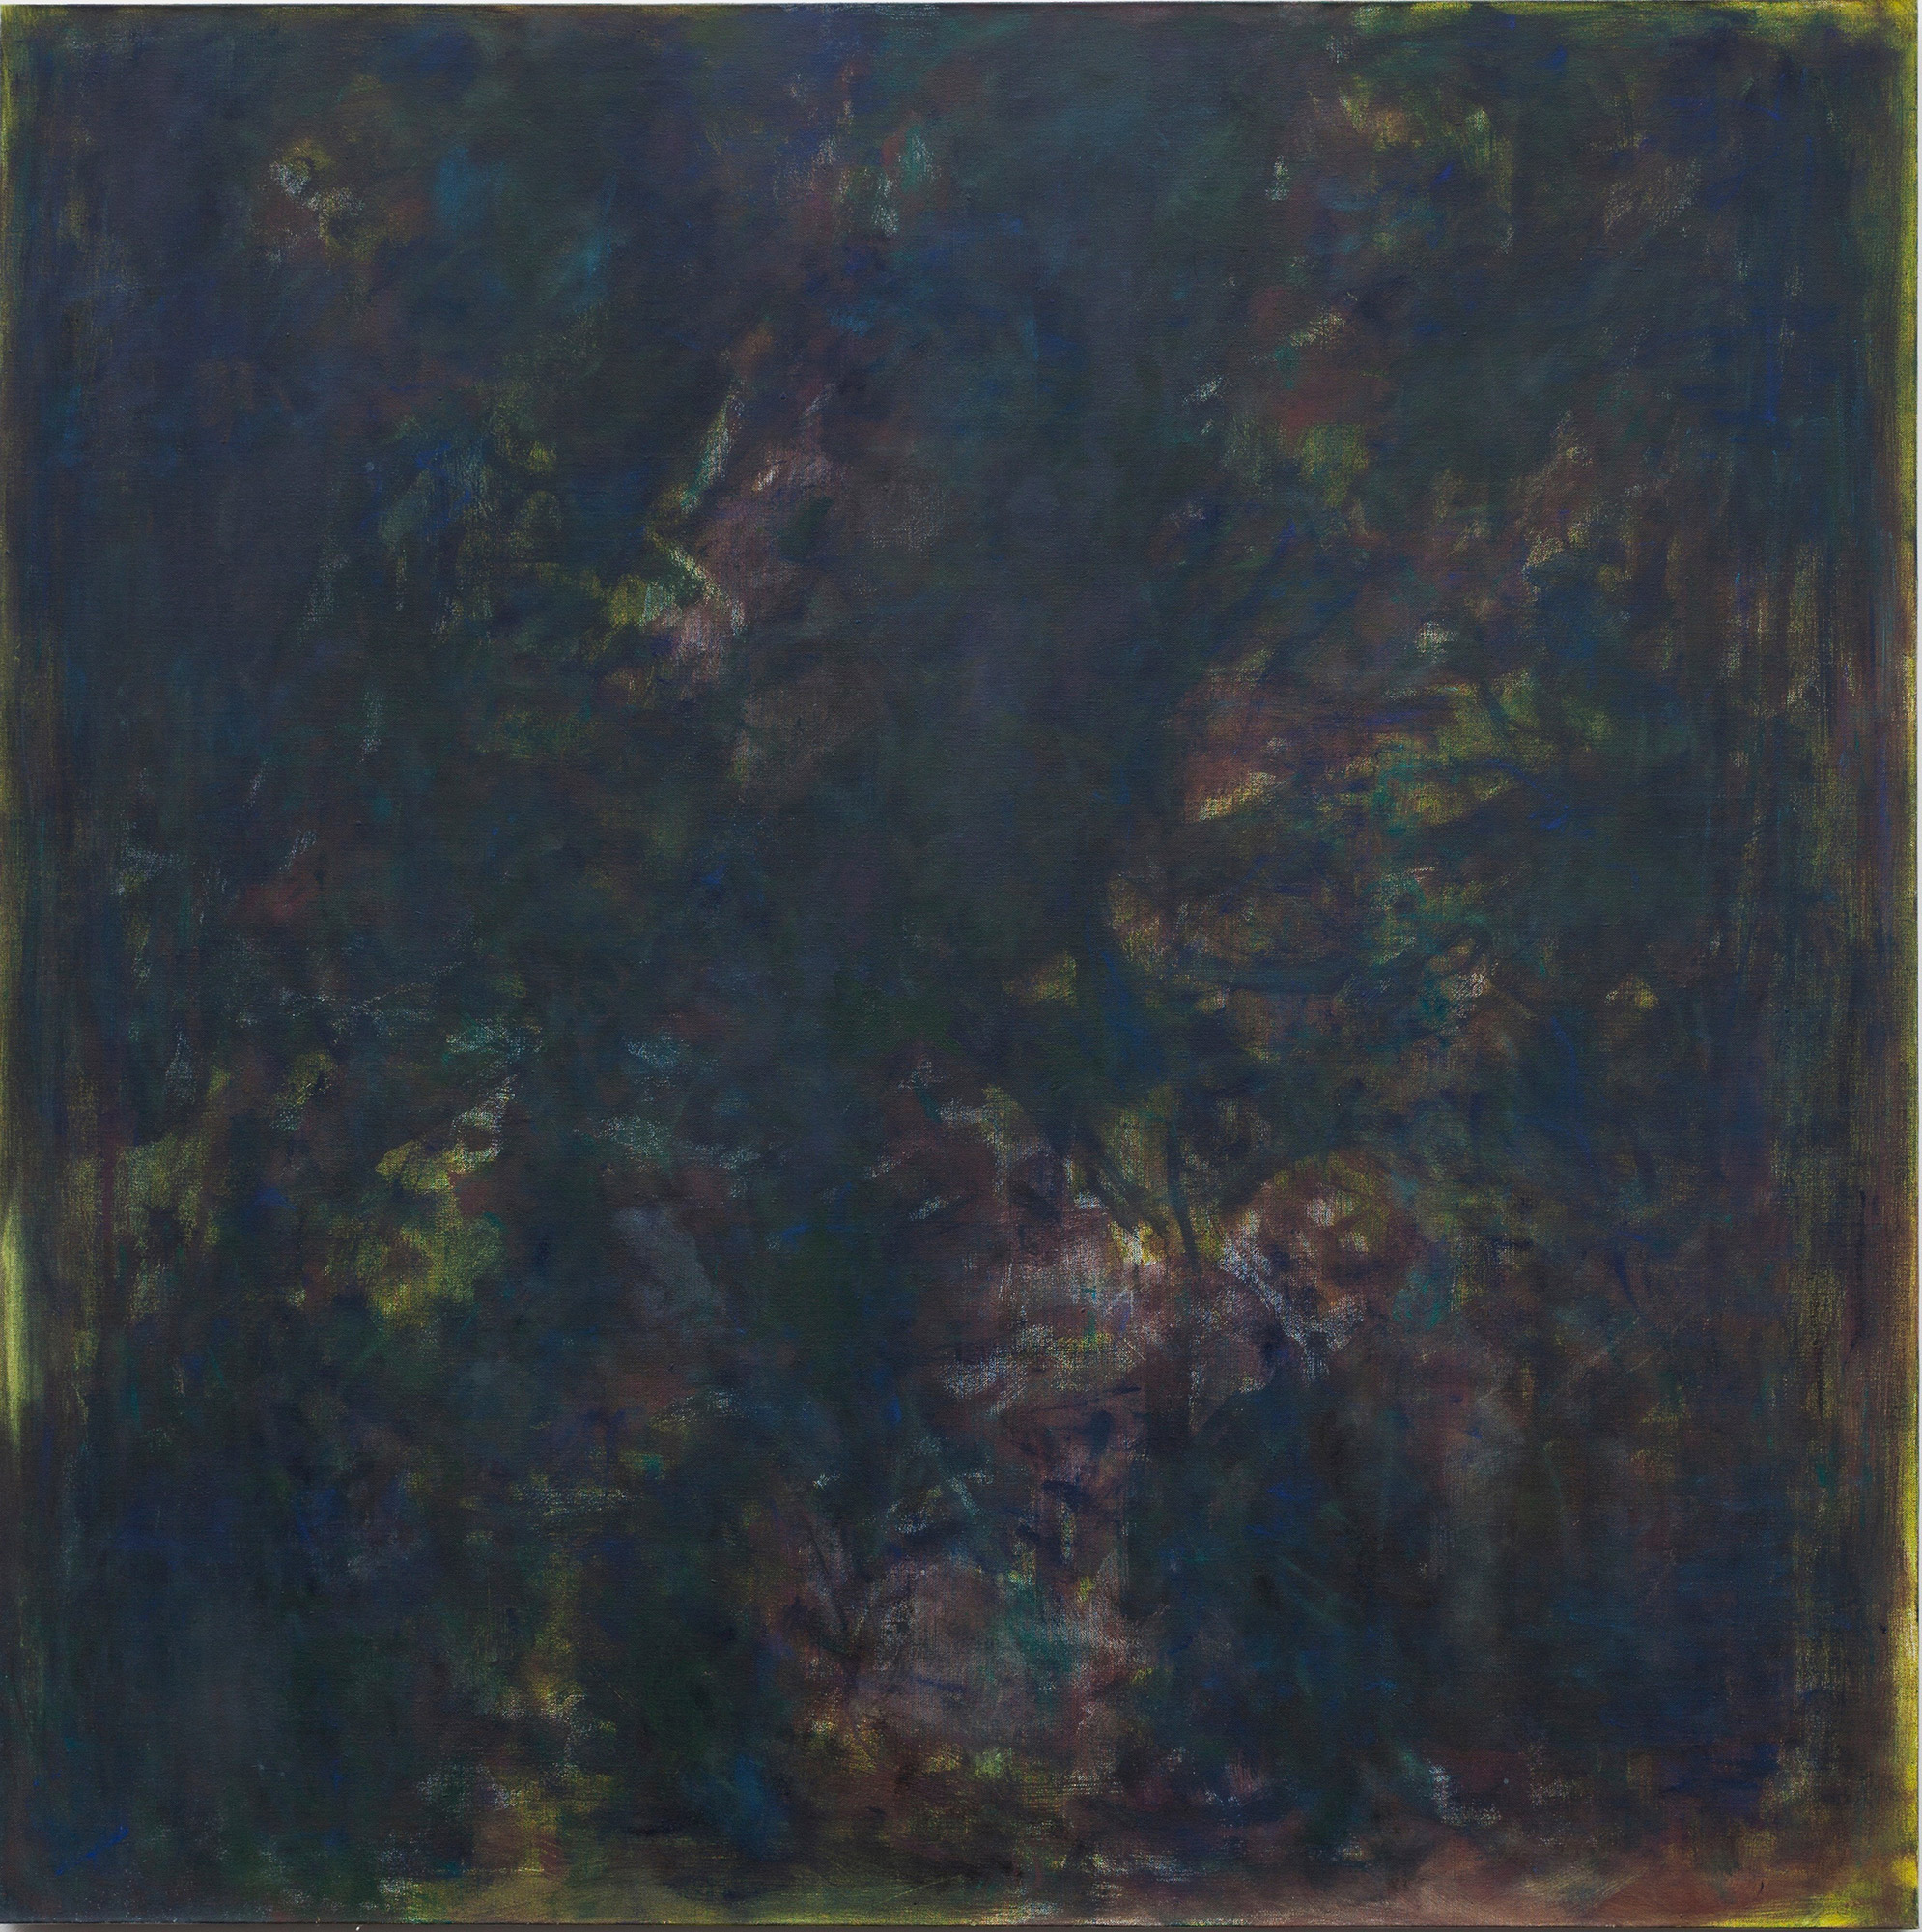 Image - Night Forest 2015